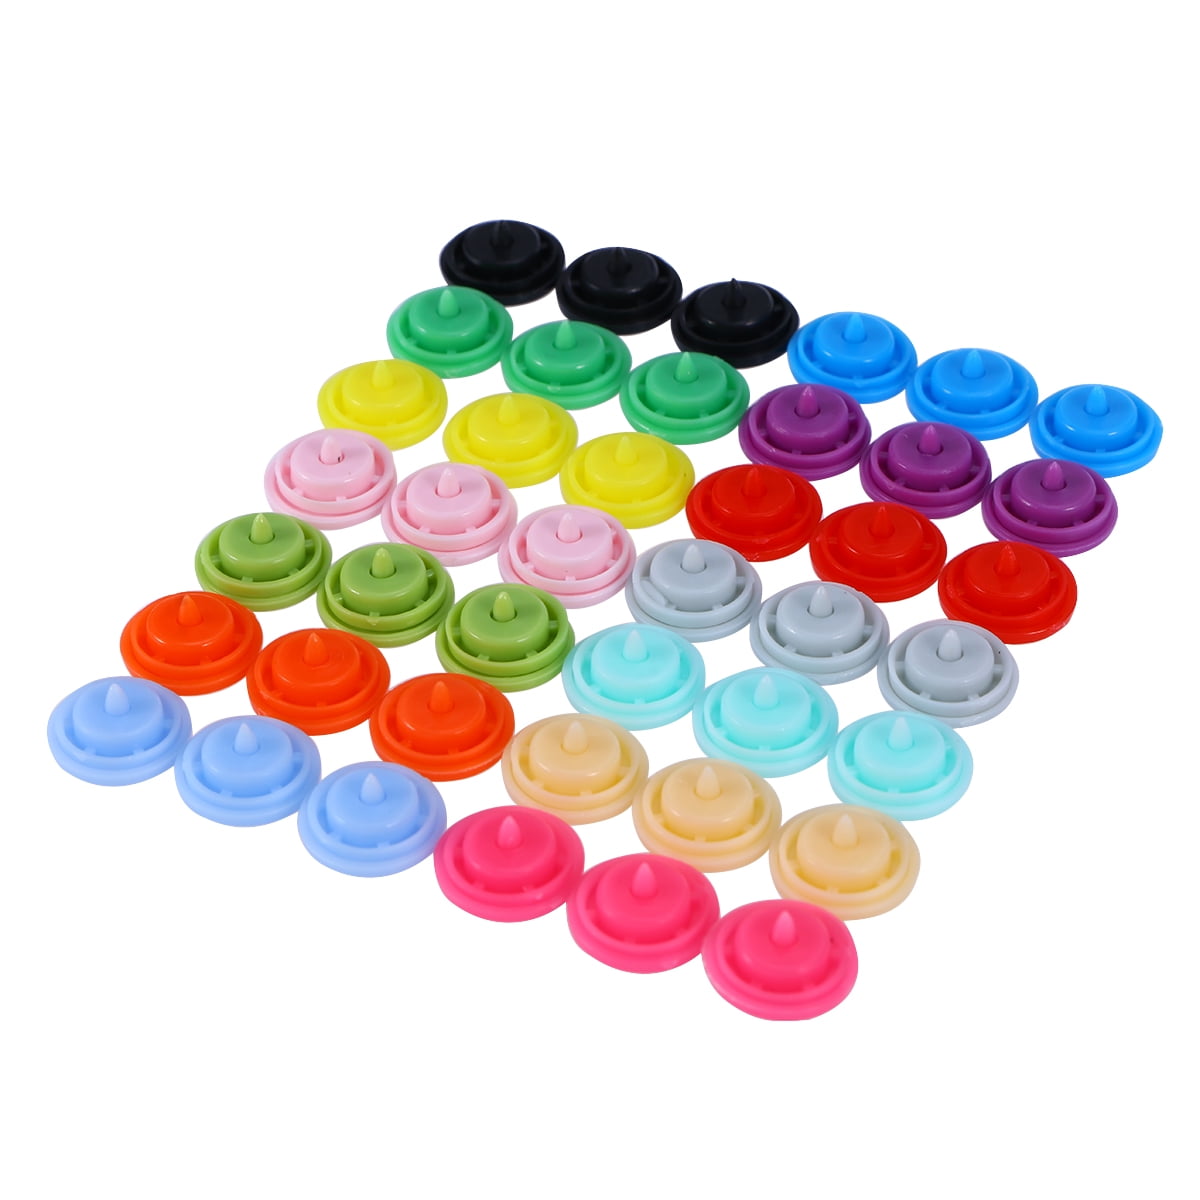 Lyrow 720 T5 Plastic Snap Buttons for Sewing and Crafting No Sew Snaps  Fabric Bib Snaps Colorful Buttons Starter Fasteners for Clothing Bibs  Diapers